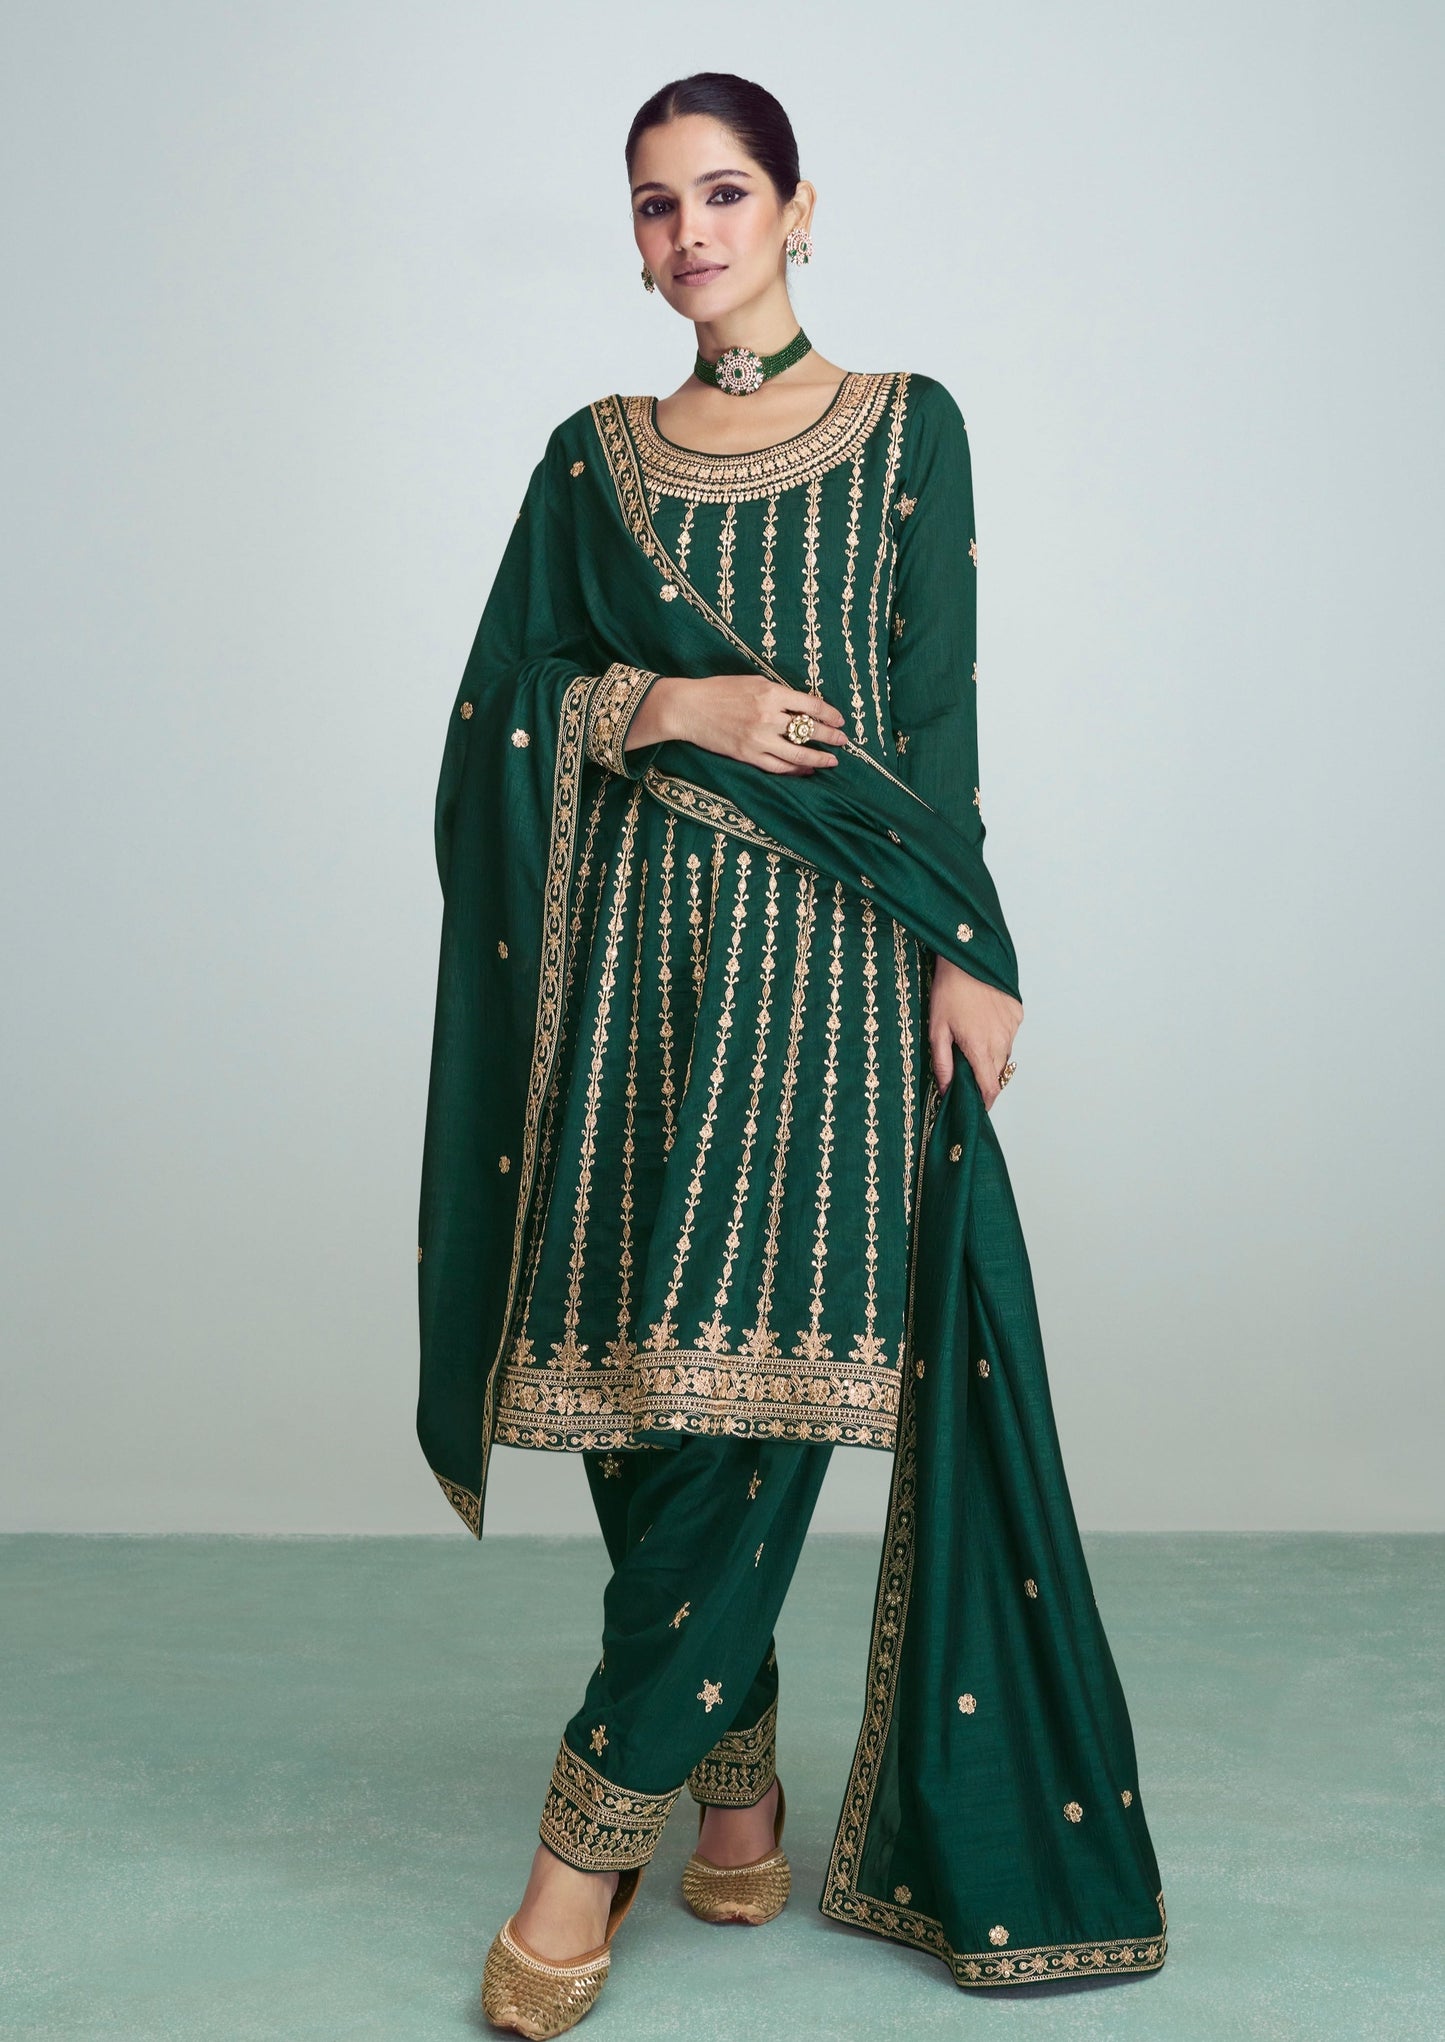 woman in green salwar suit with heavy neck design